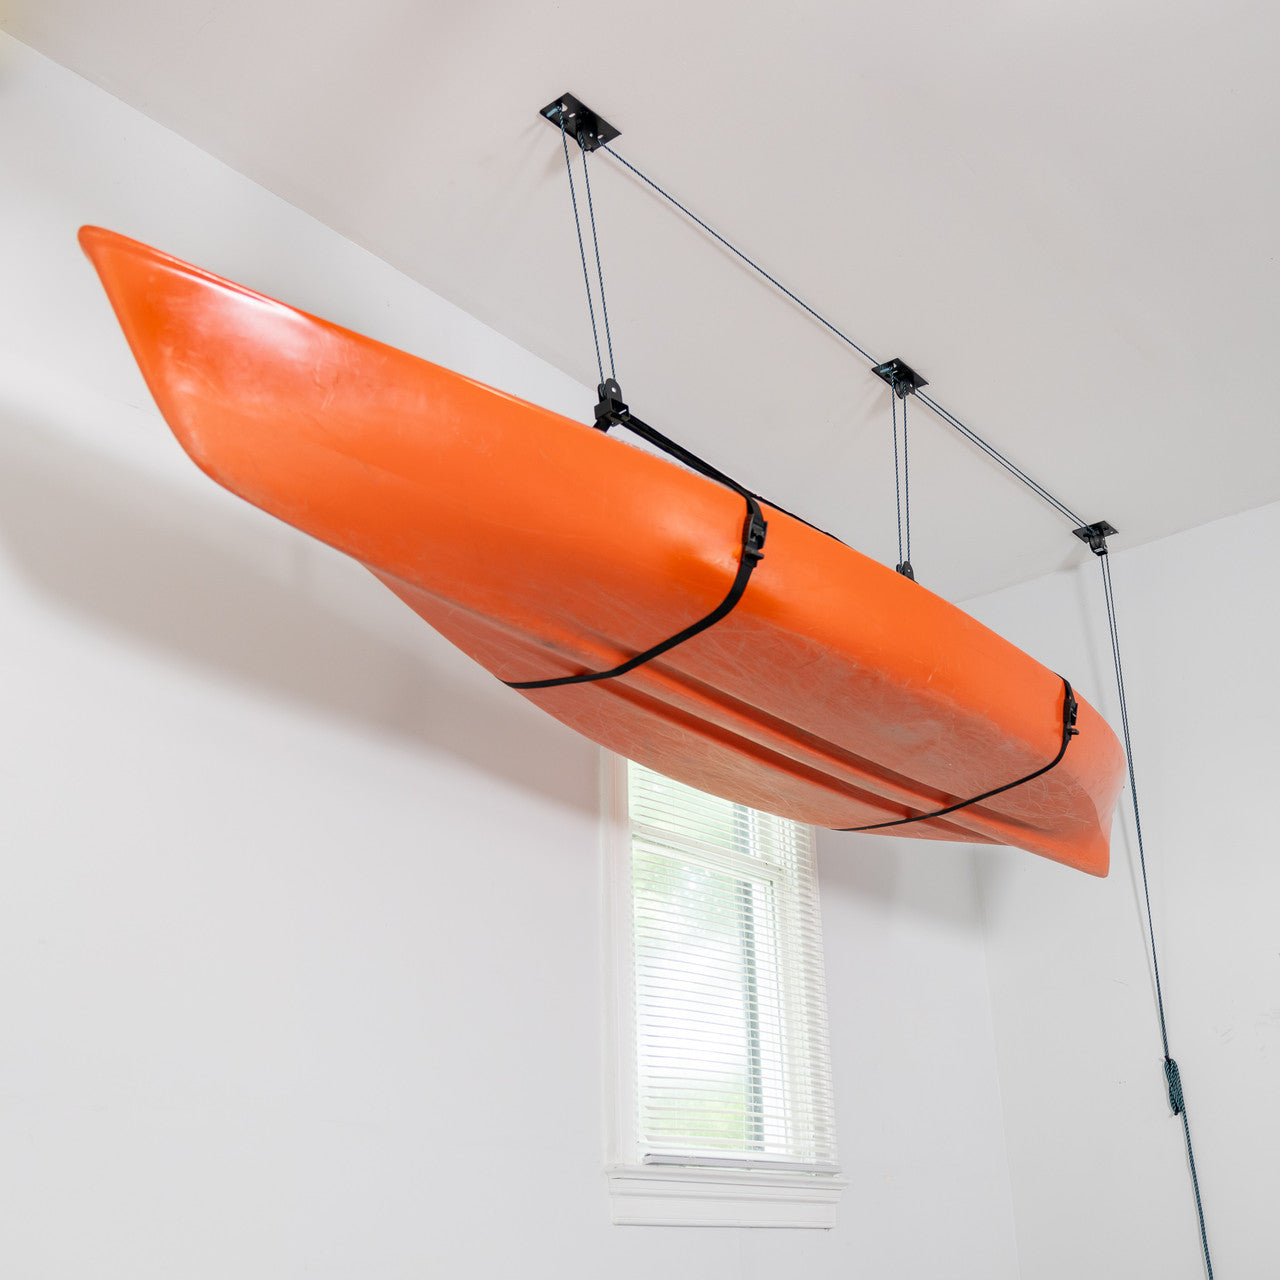 Teal Triangle Elite Kayak Pulley System, 150 lbs Ceiling, and Paddleboards